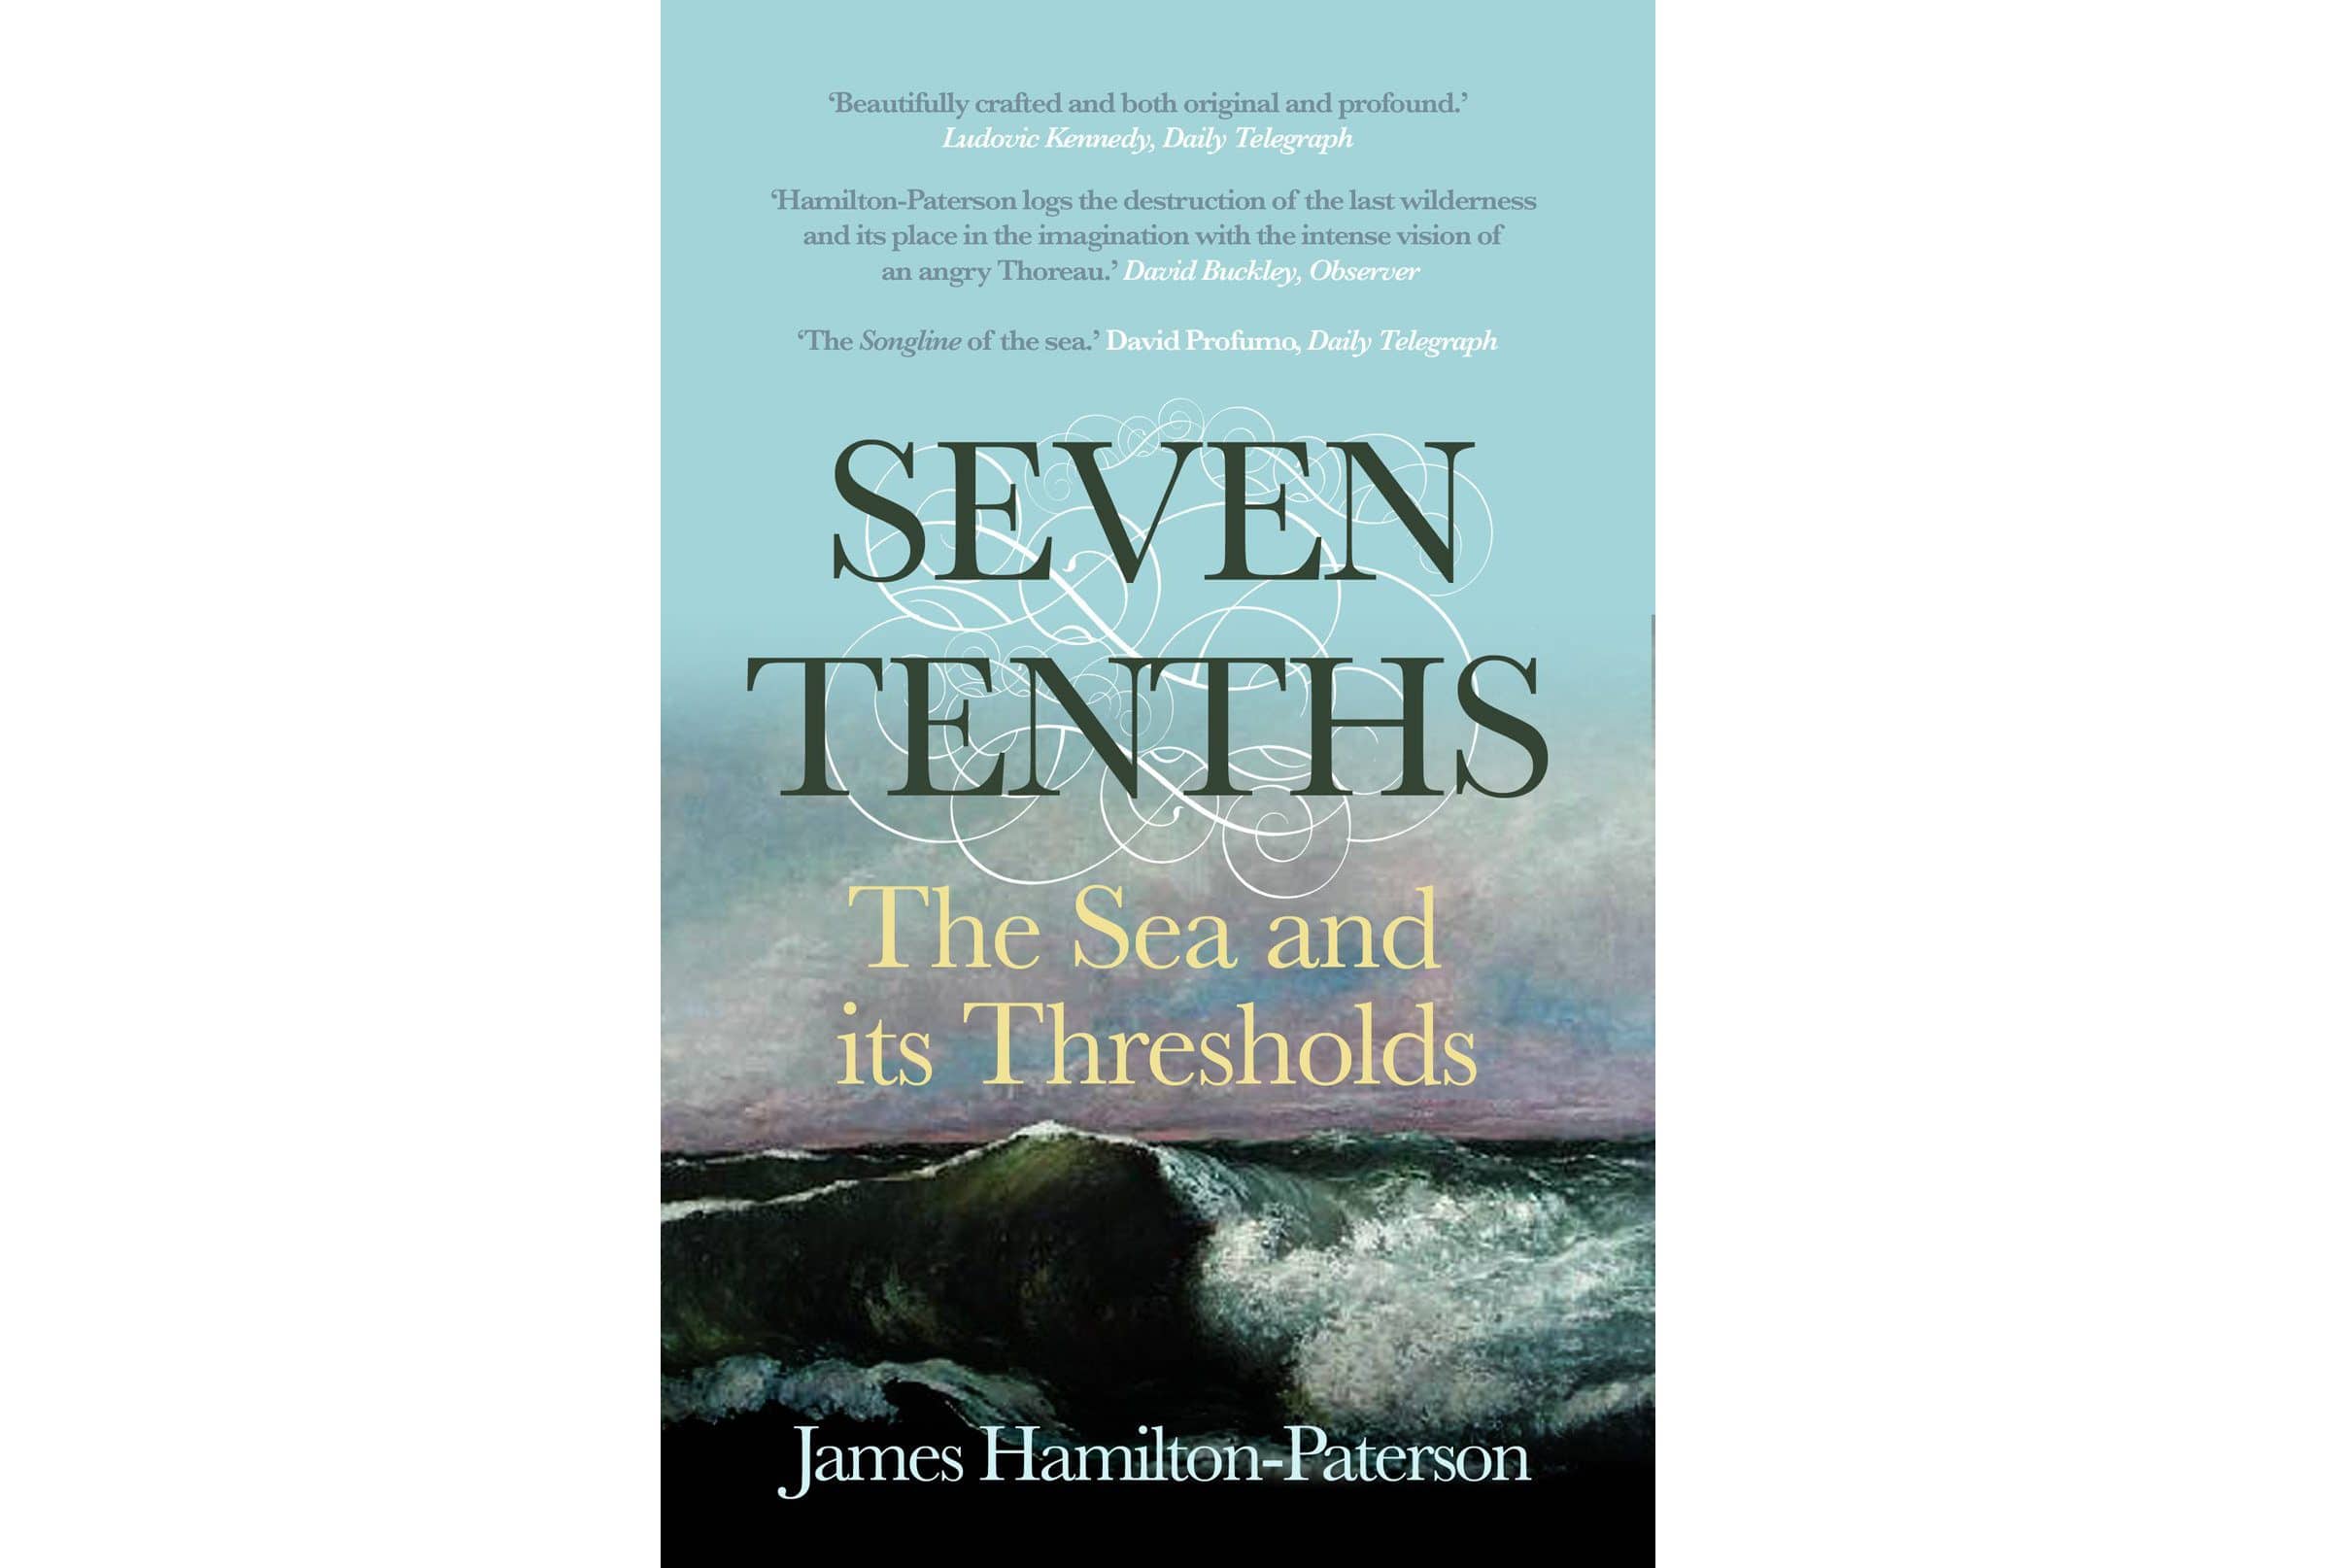 A painting of a wave breaking at sea on the cover of Seven-Tenths: The Sea and its Thresholds